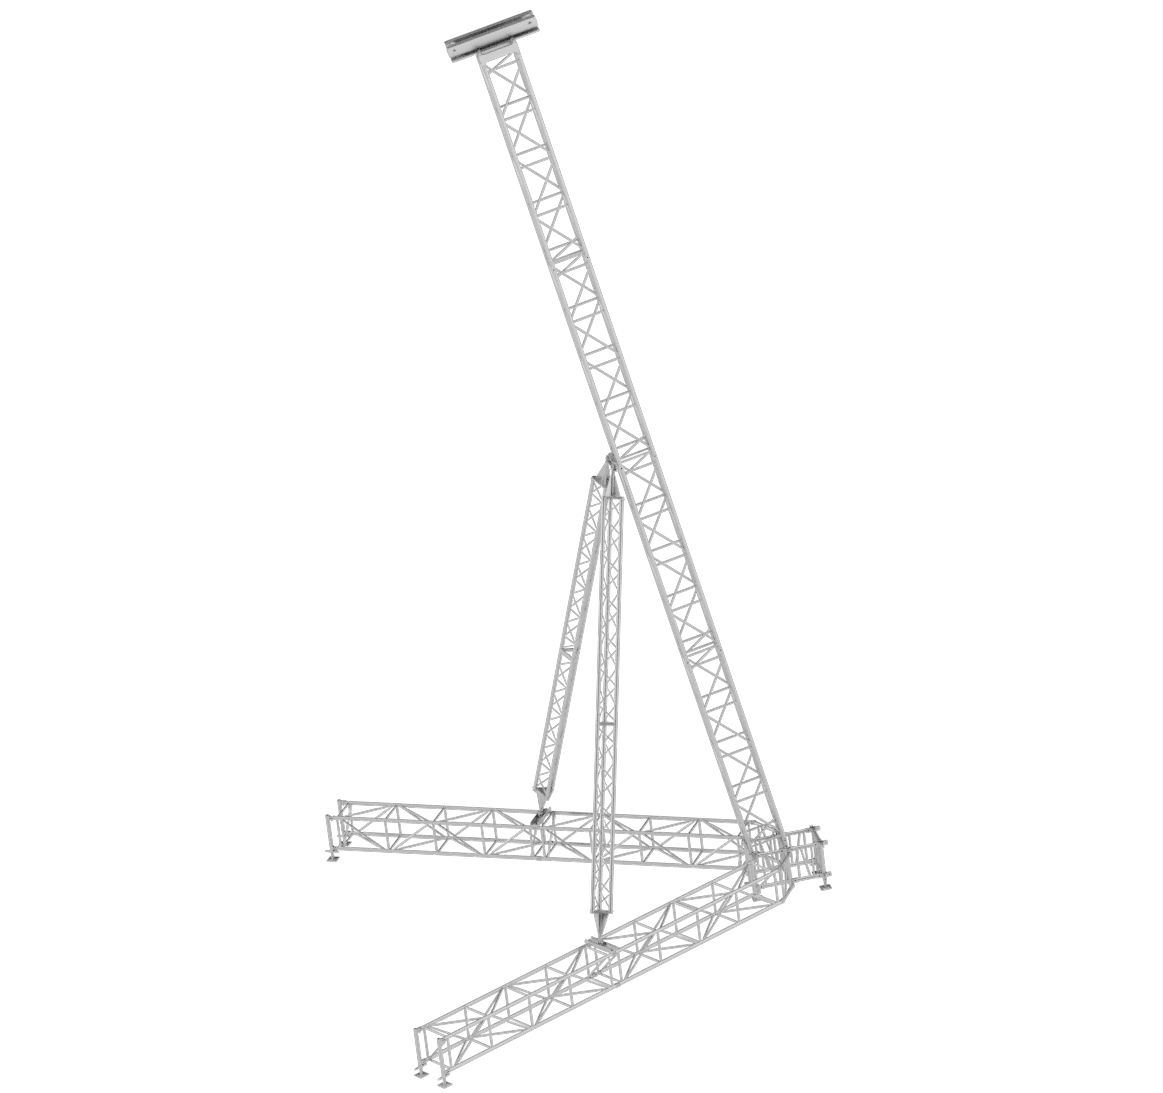 FLYINTOWER 13-1.400 - Support tover for 1,400kg up to 13m